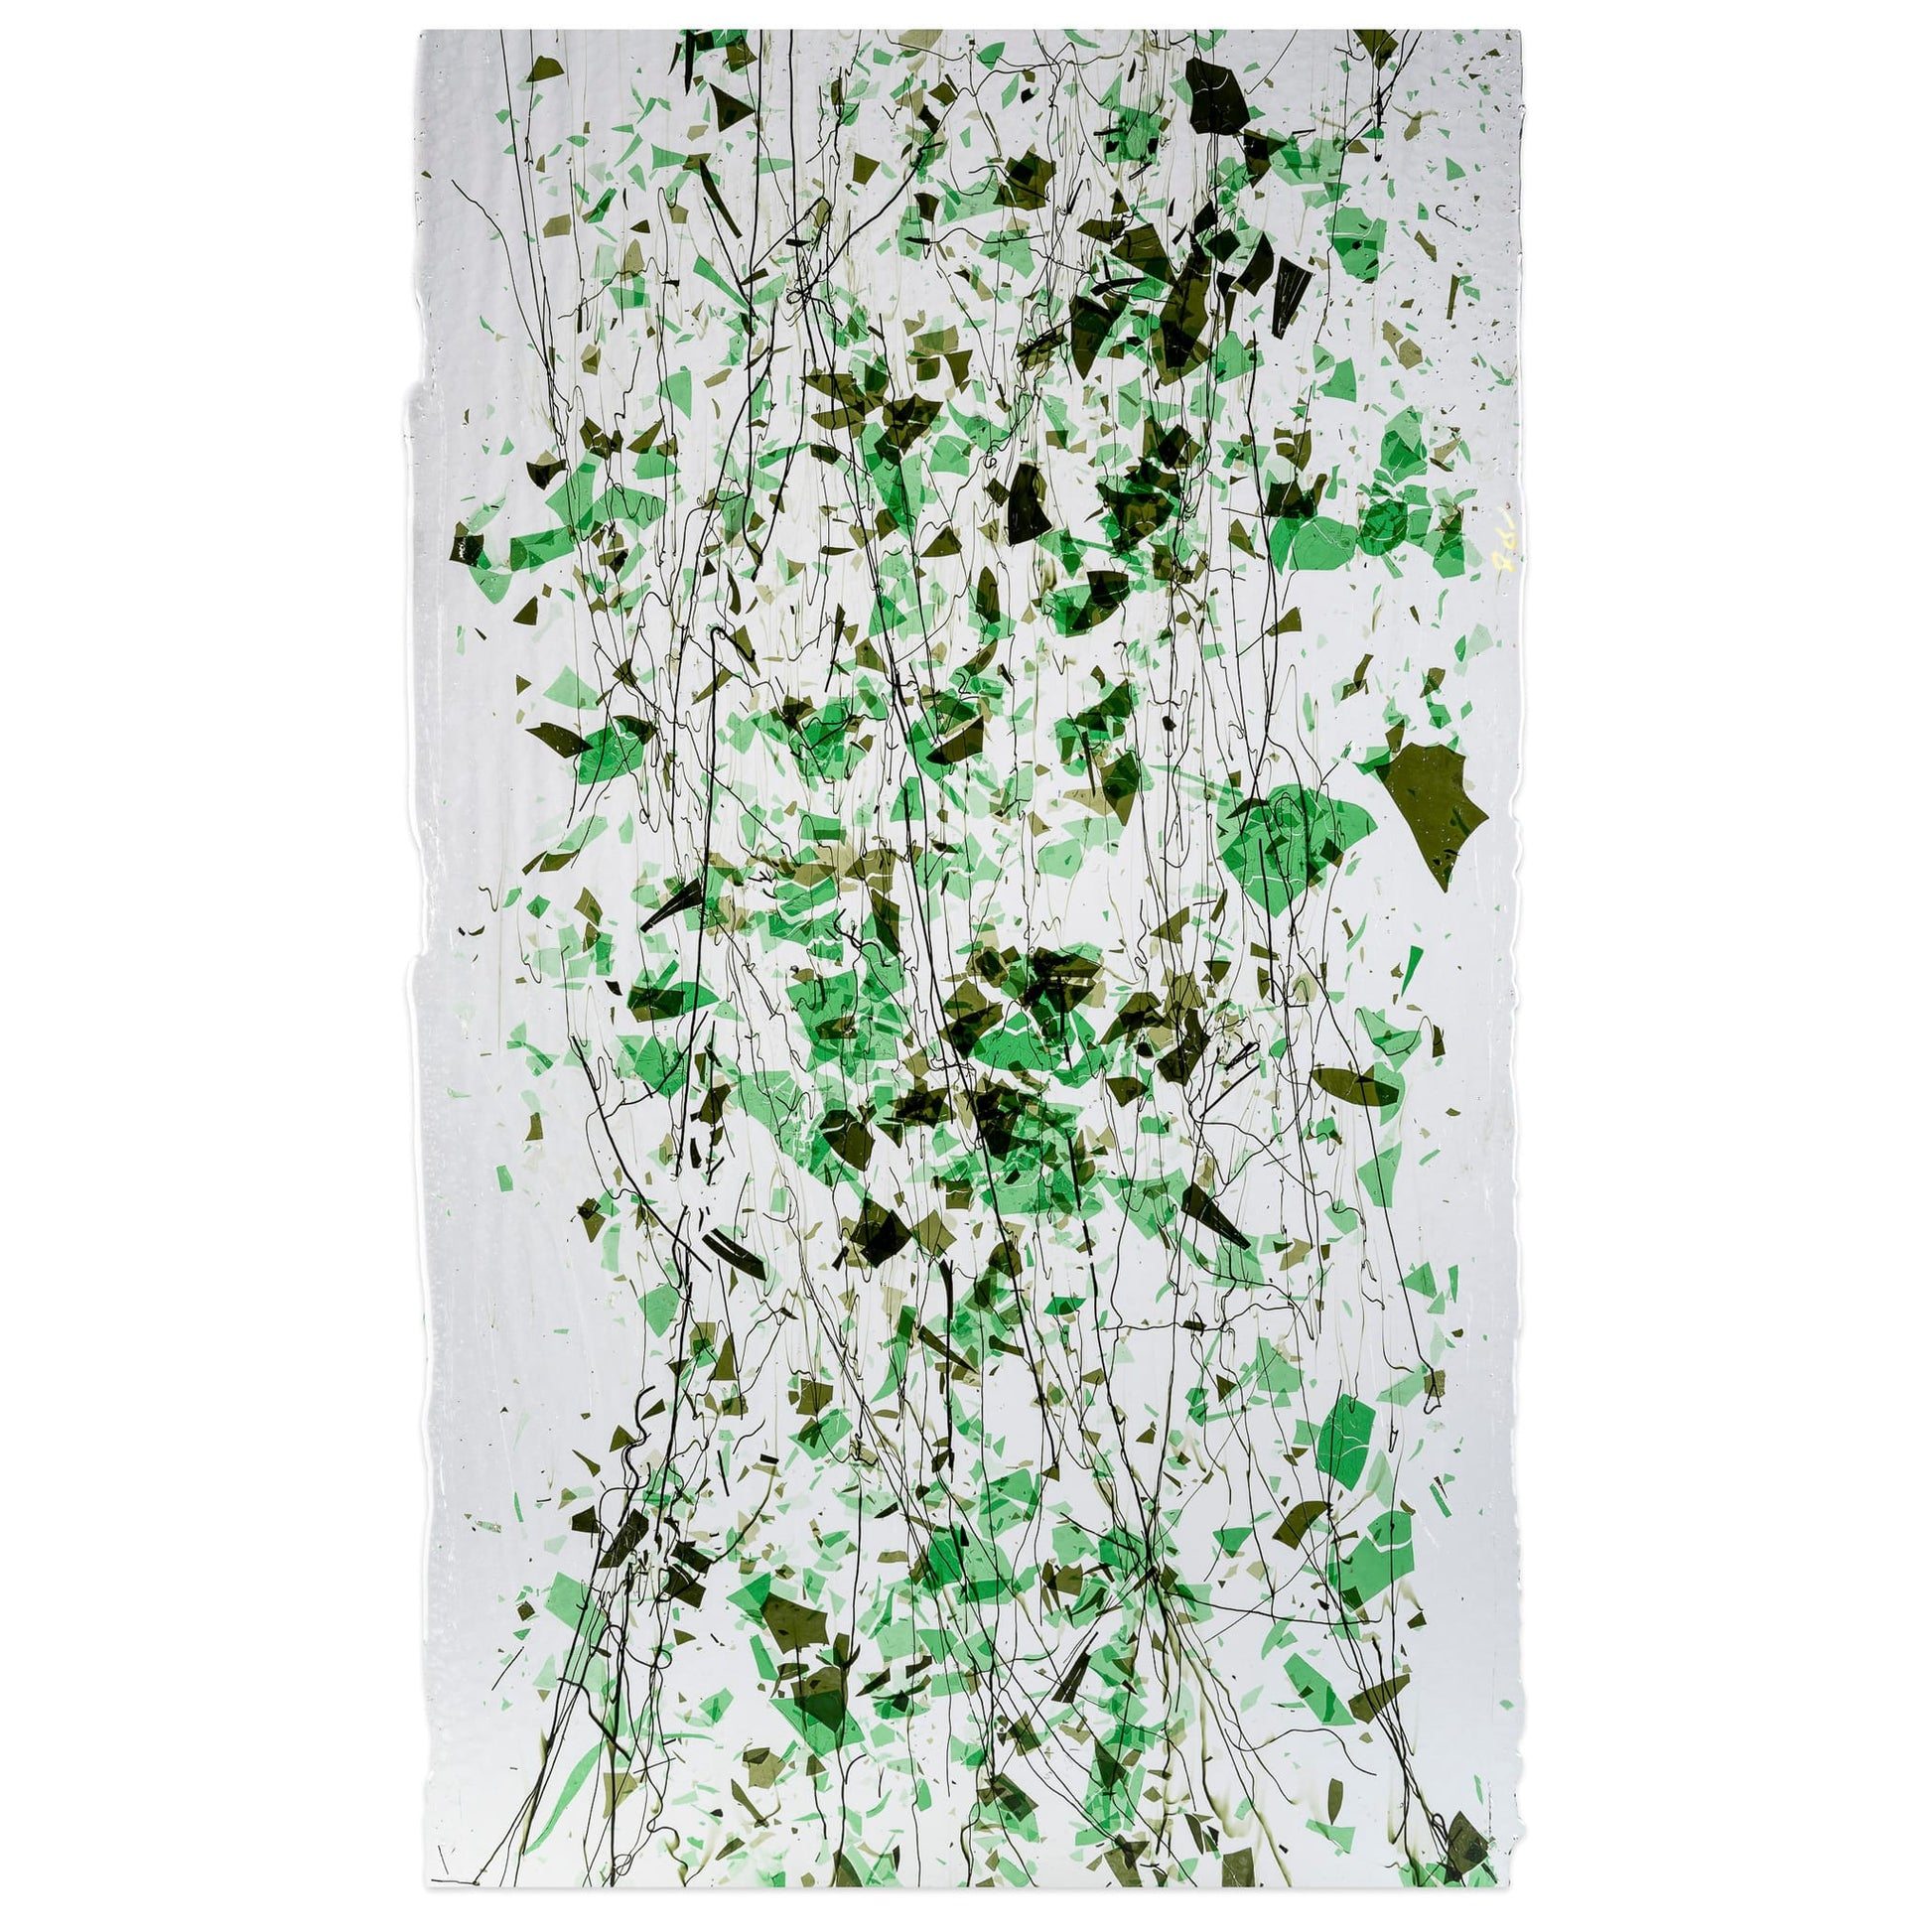 Bullseye COE90 Fusing Glass 004325 Green Fracture with Line Cast Green Streamers on Clear Half Sheet